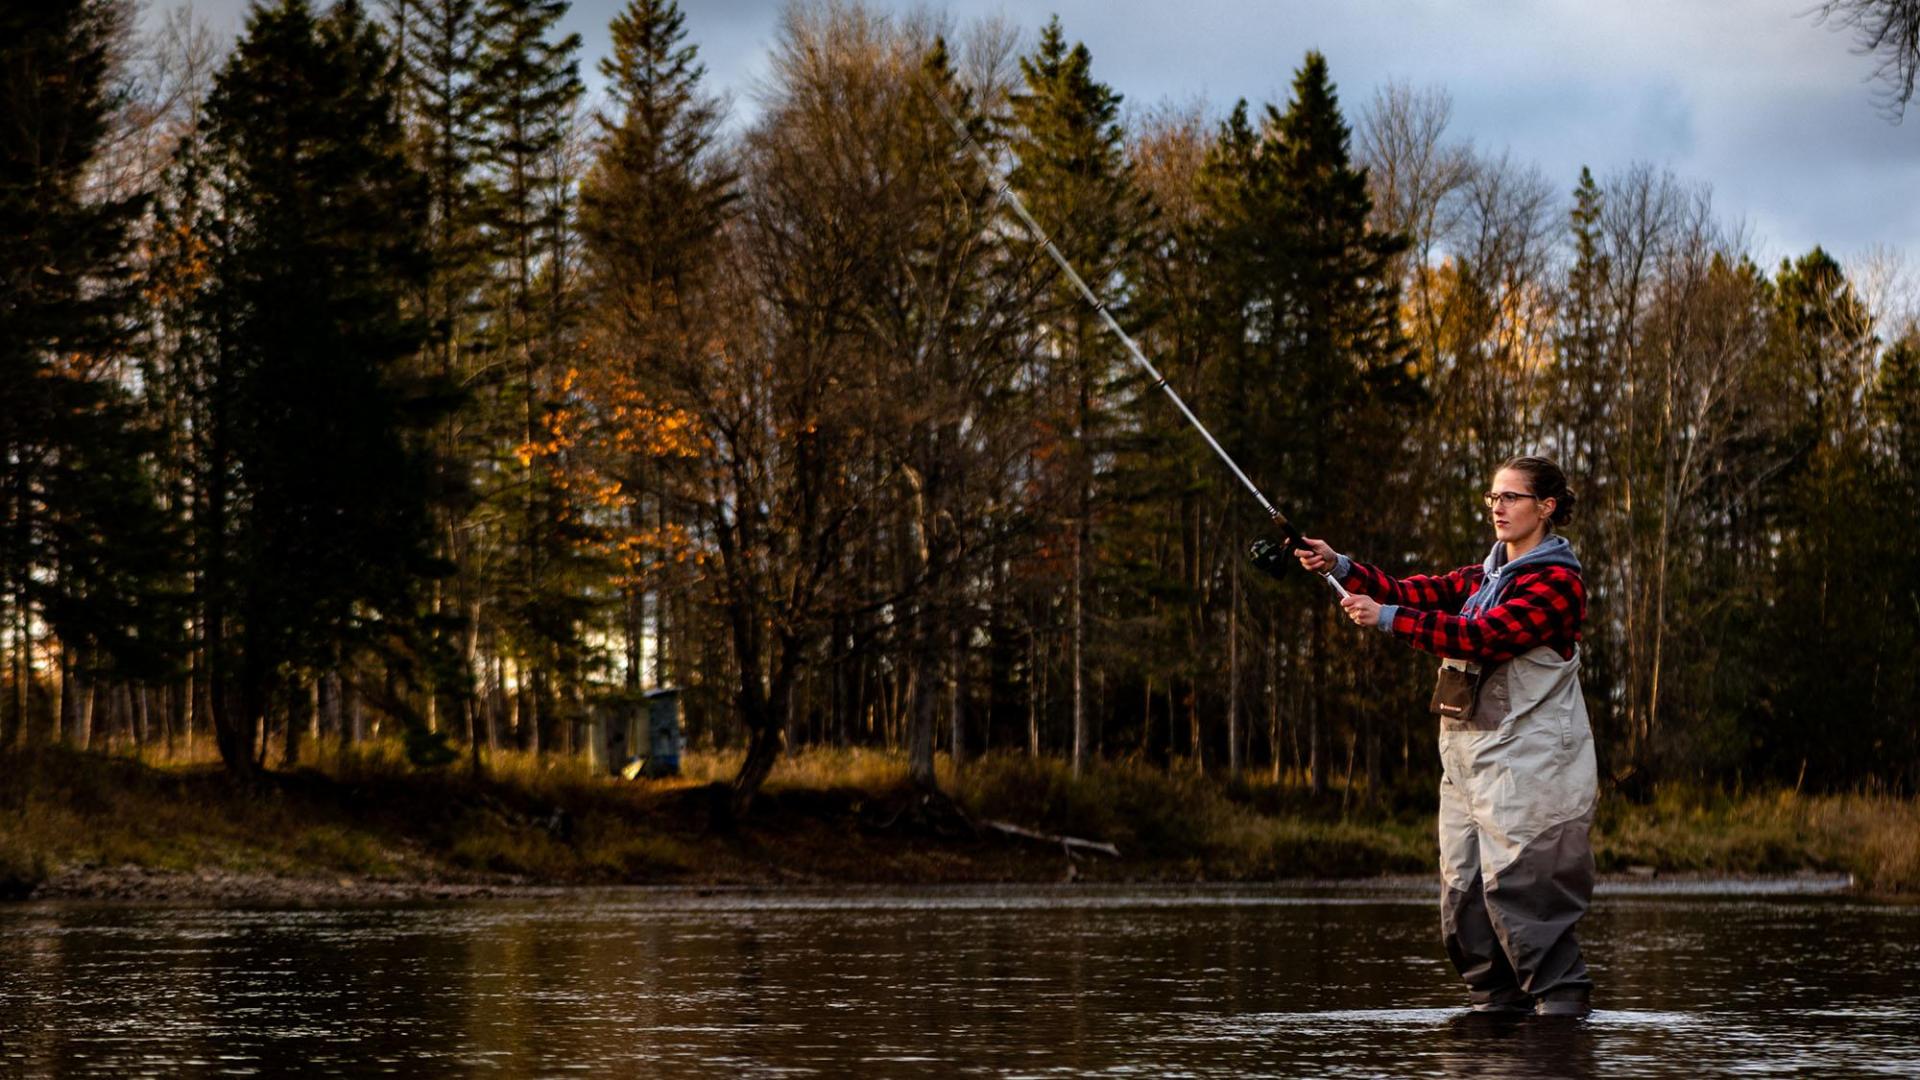 A person in plaid and waiters fishing on the Escanaba river